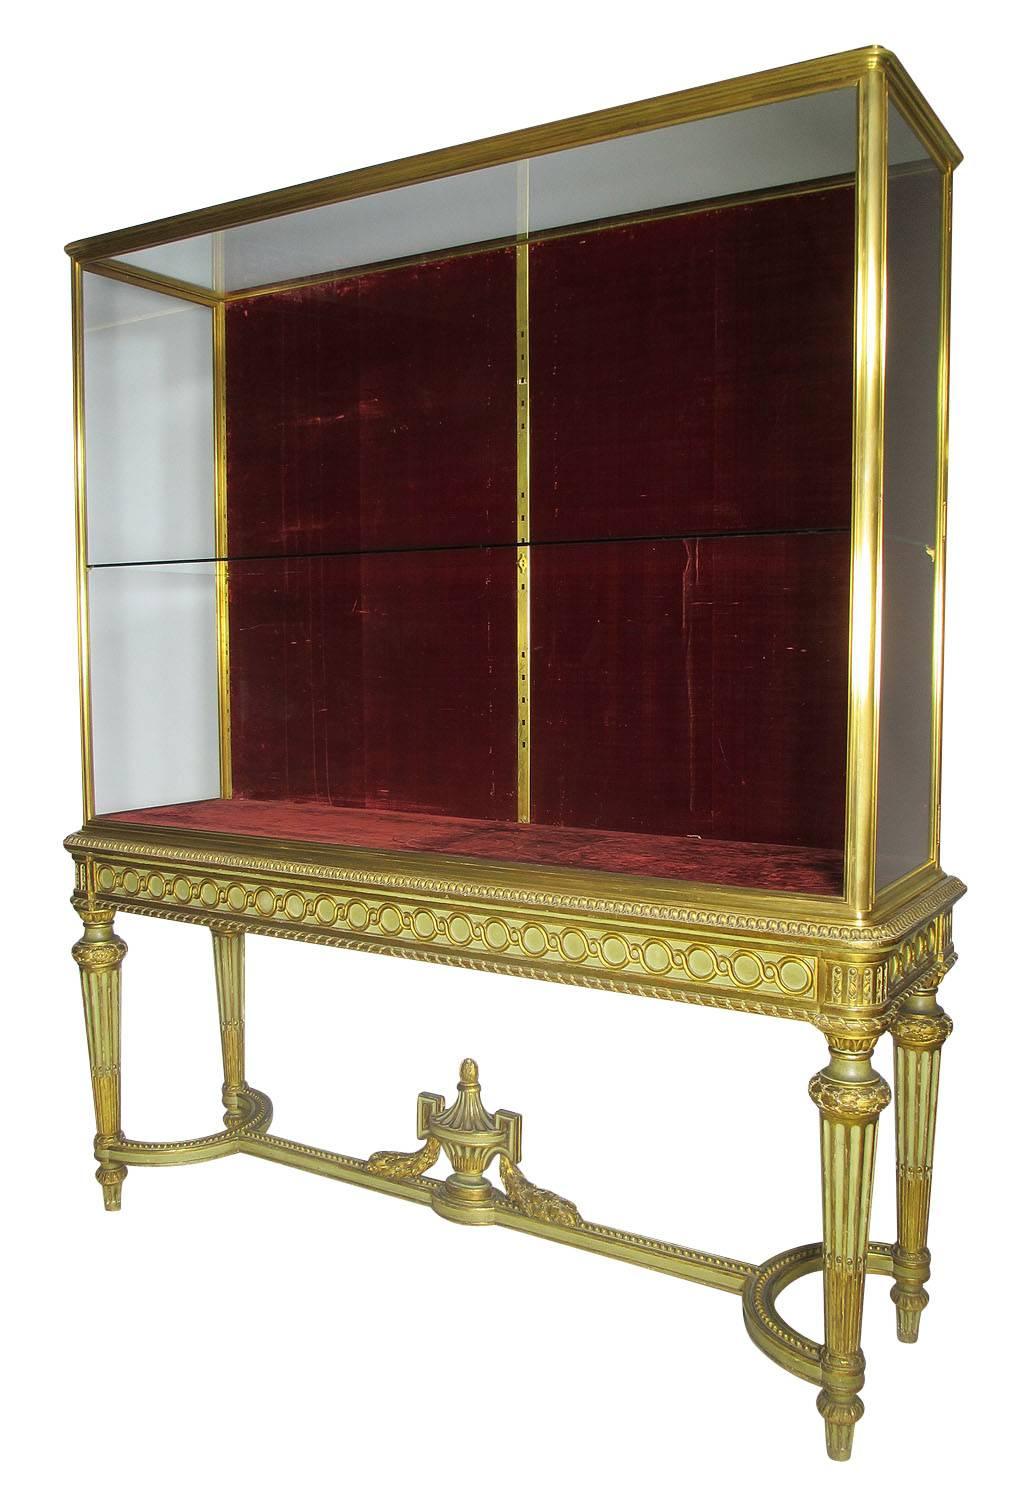 A very fine French Louis XVI style Belle Époque gilt bronze and carved verde green and parcel-gilt exhibition vitrine display cabinet with side doors, circa 1900, Paris.

Measures: Height 73 1/4 inches (186.1 cm).
Width 63 inches (160 cm).
Depth